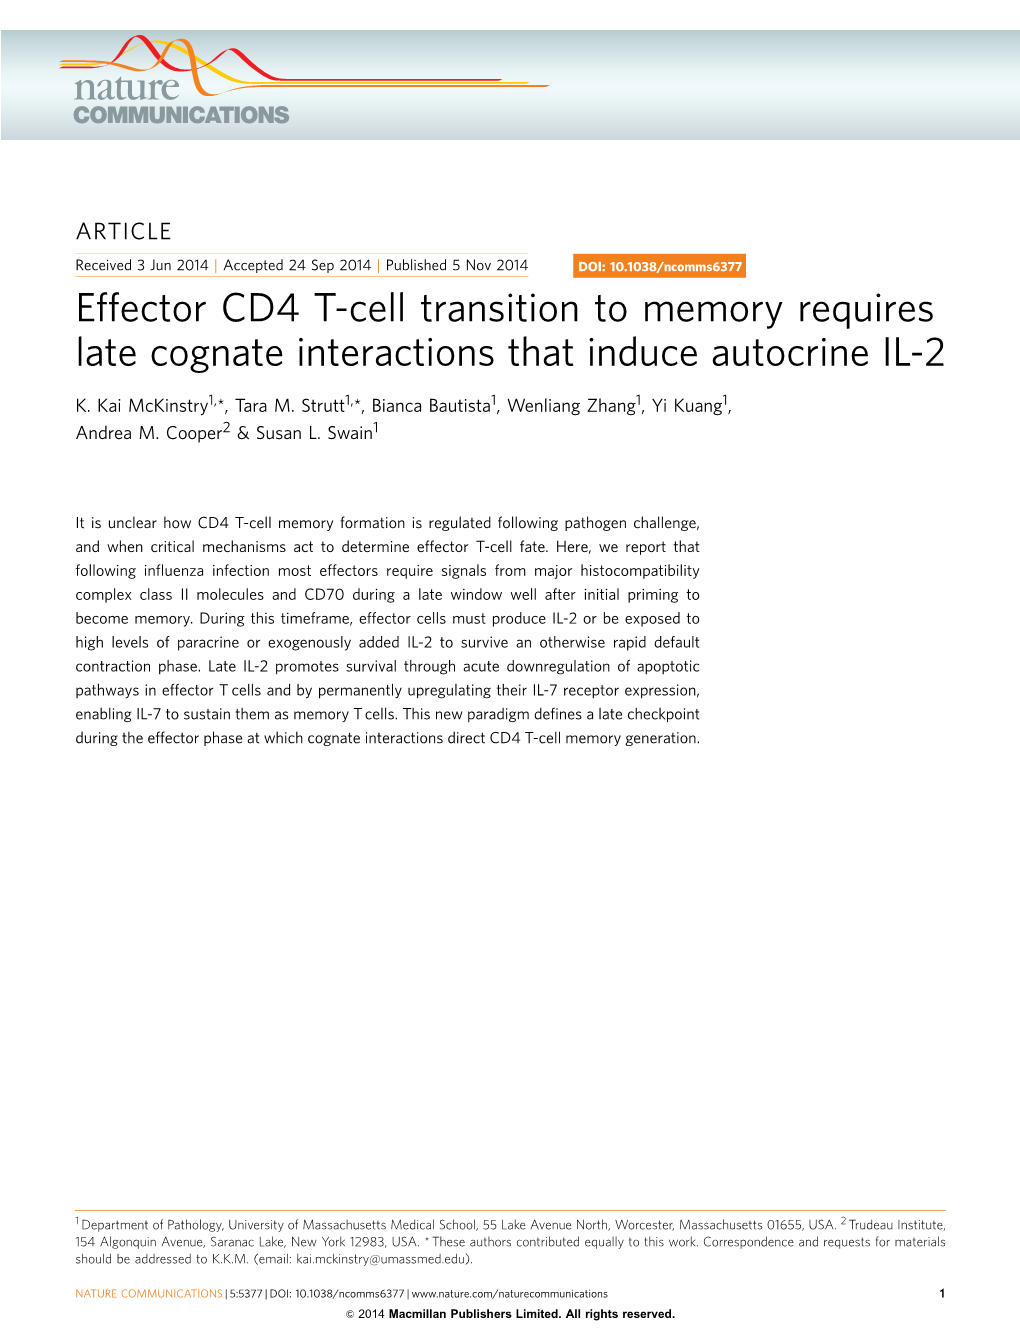 Effector CD4 T-Cell Transition to Memory Requires Late Cognate Interactions That Induce Autocrine IL-2